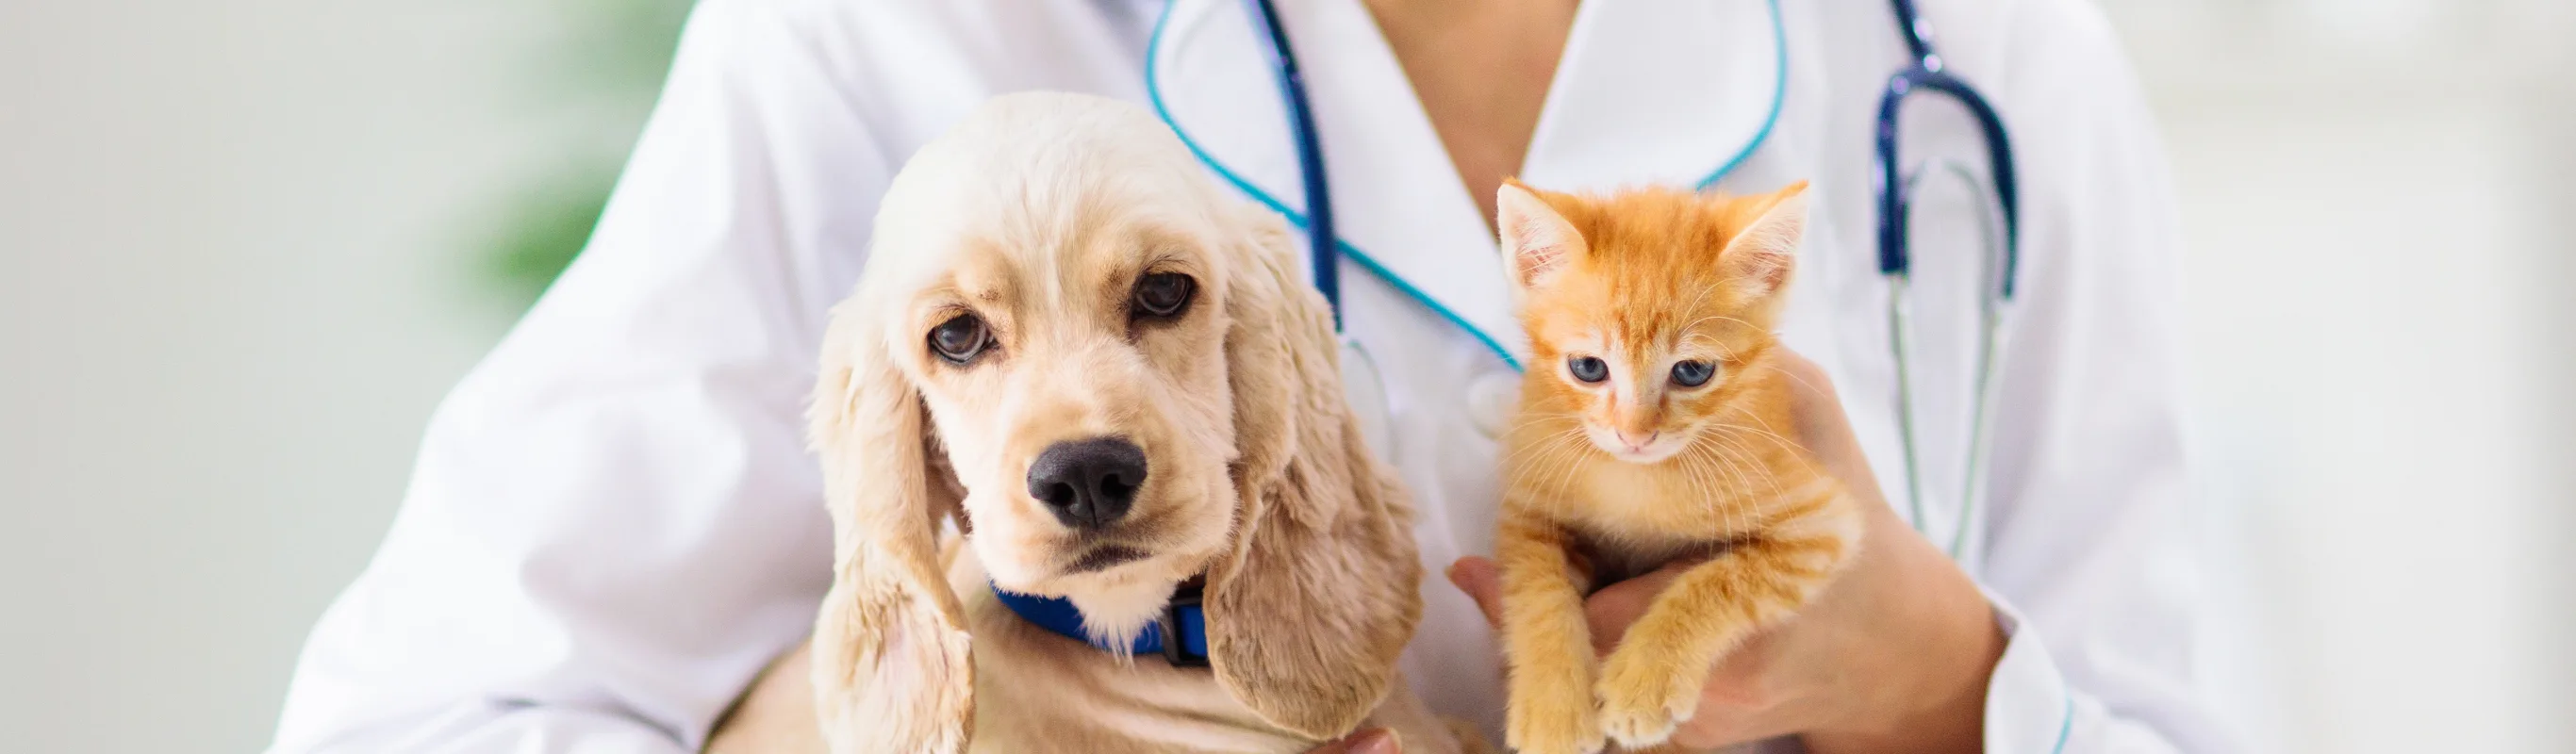 Doctor holding dog and cat